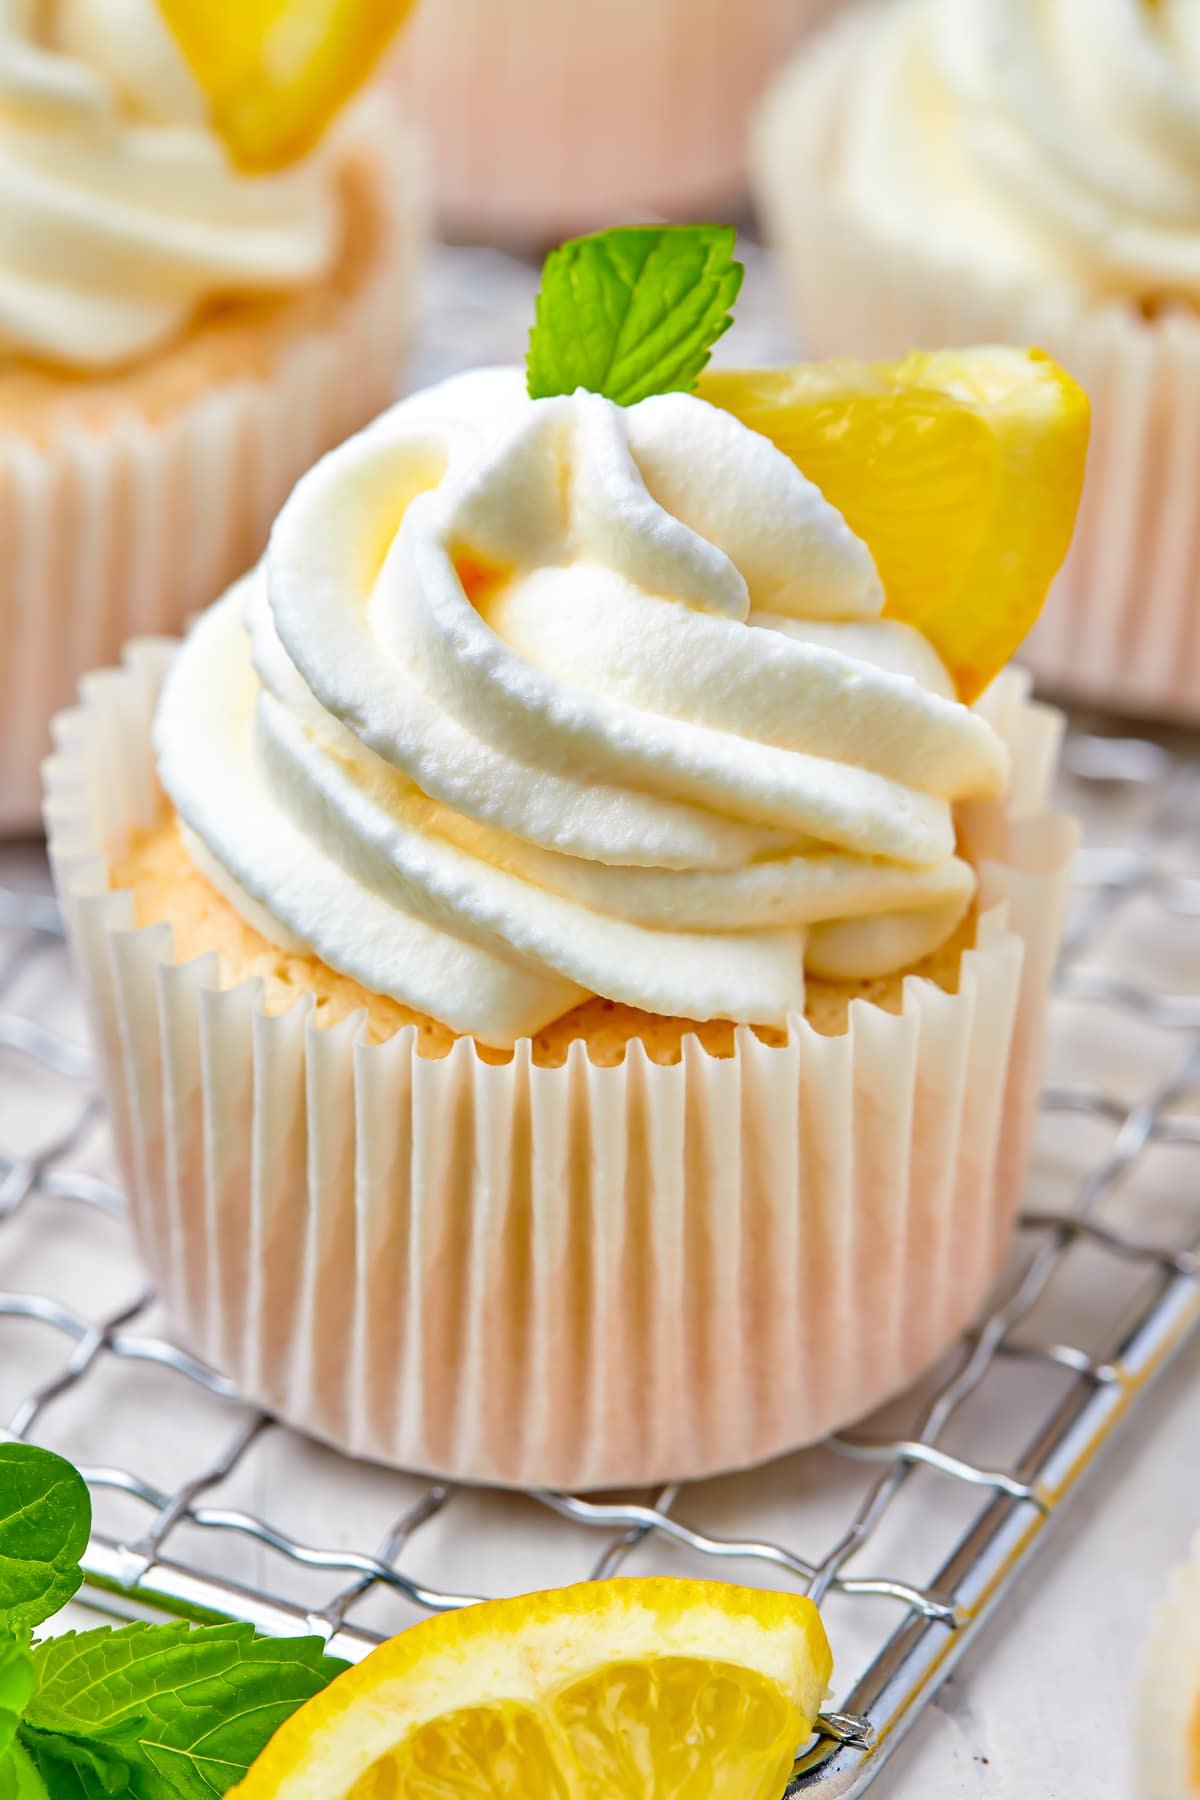 Upclose image of Angel Food Cupcake on a wire rack with lemon slices and sprig of mint